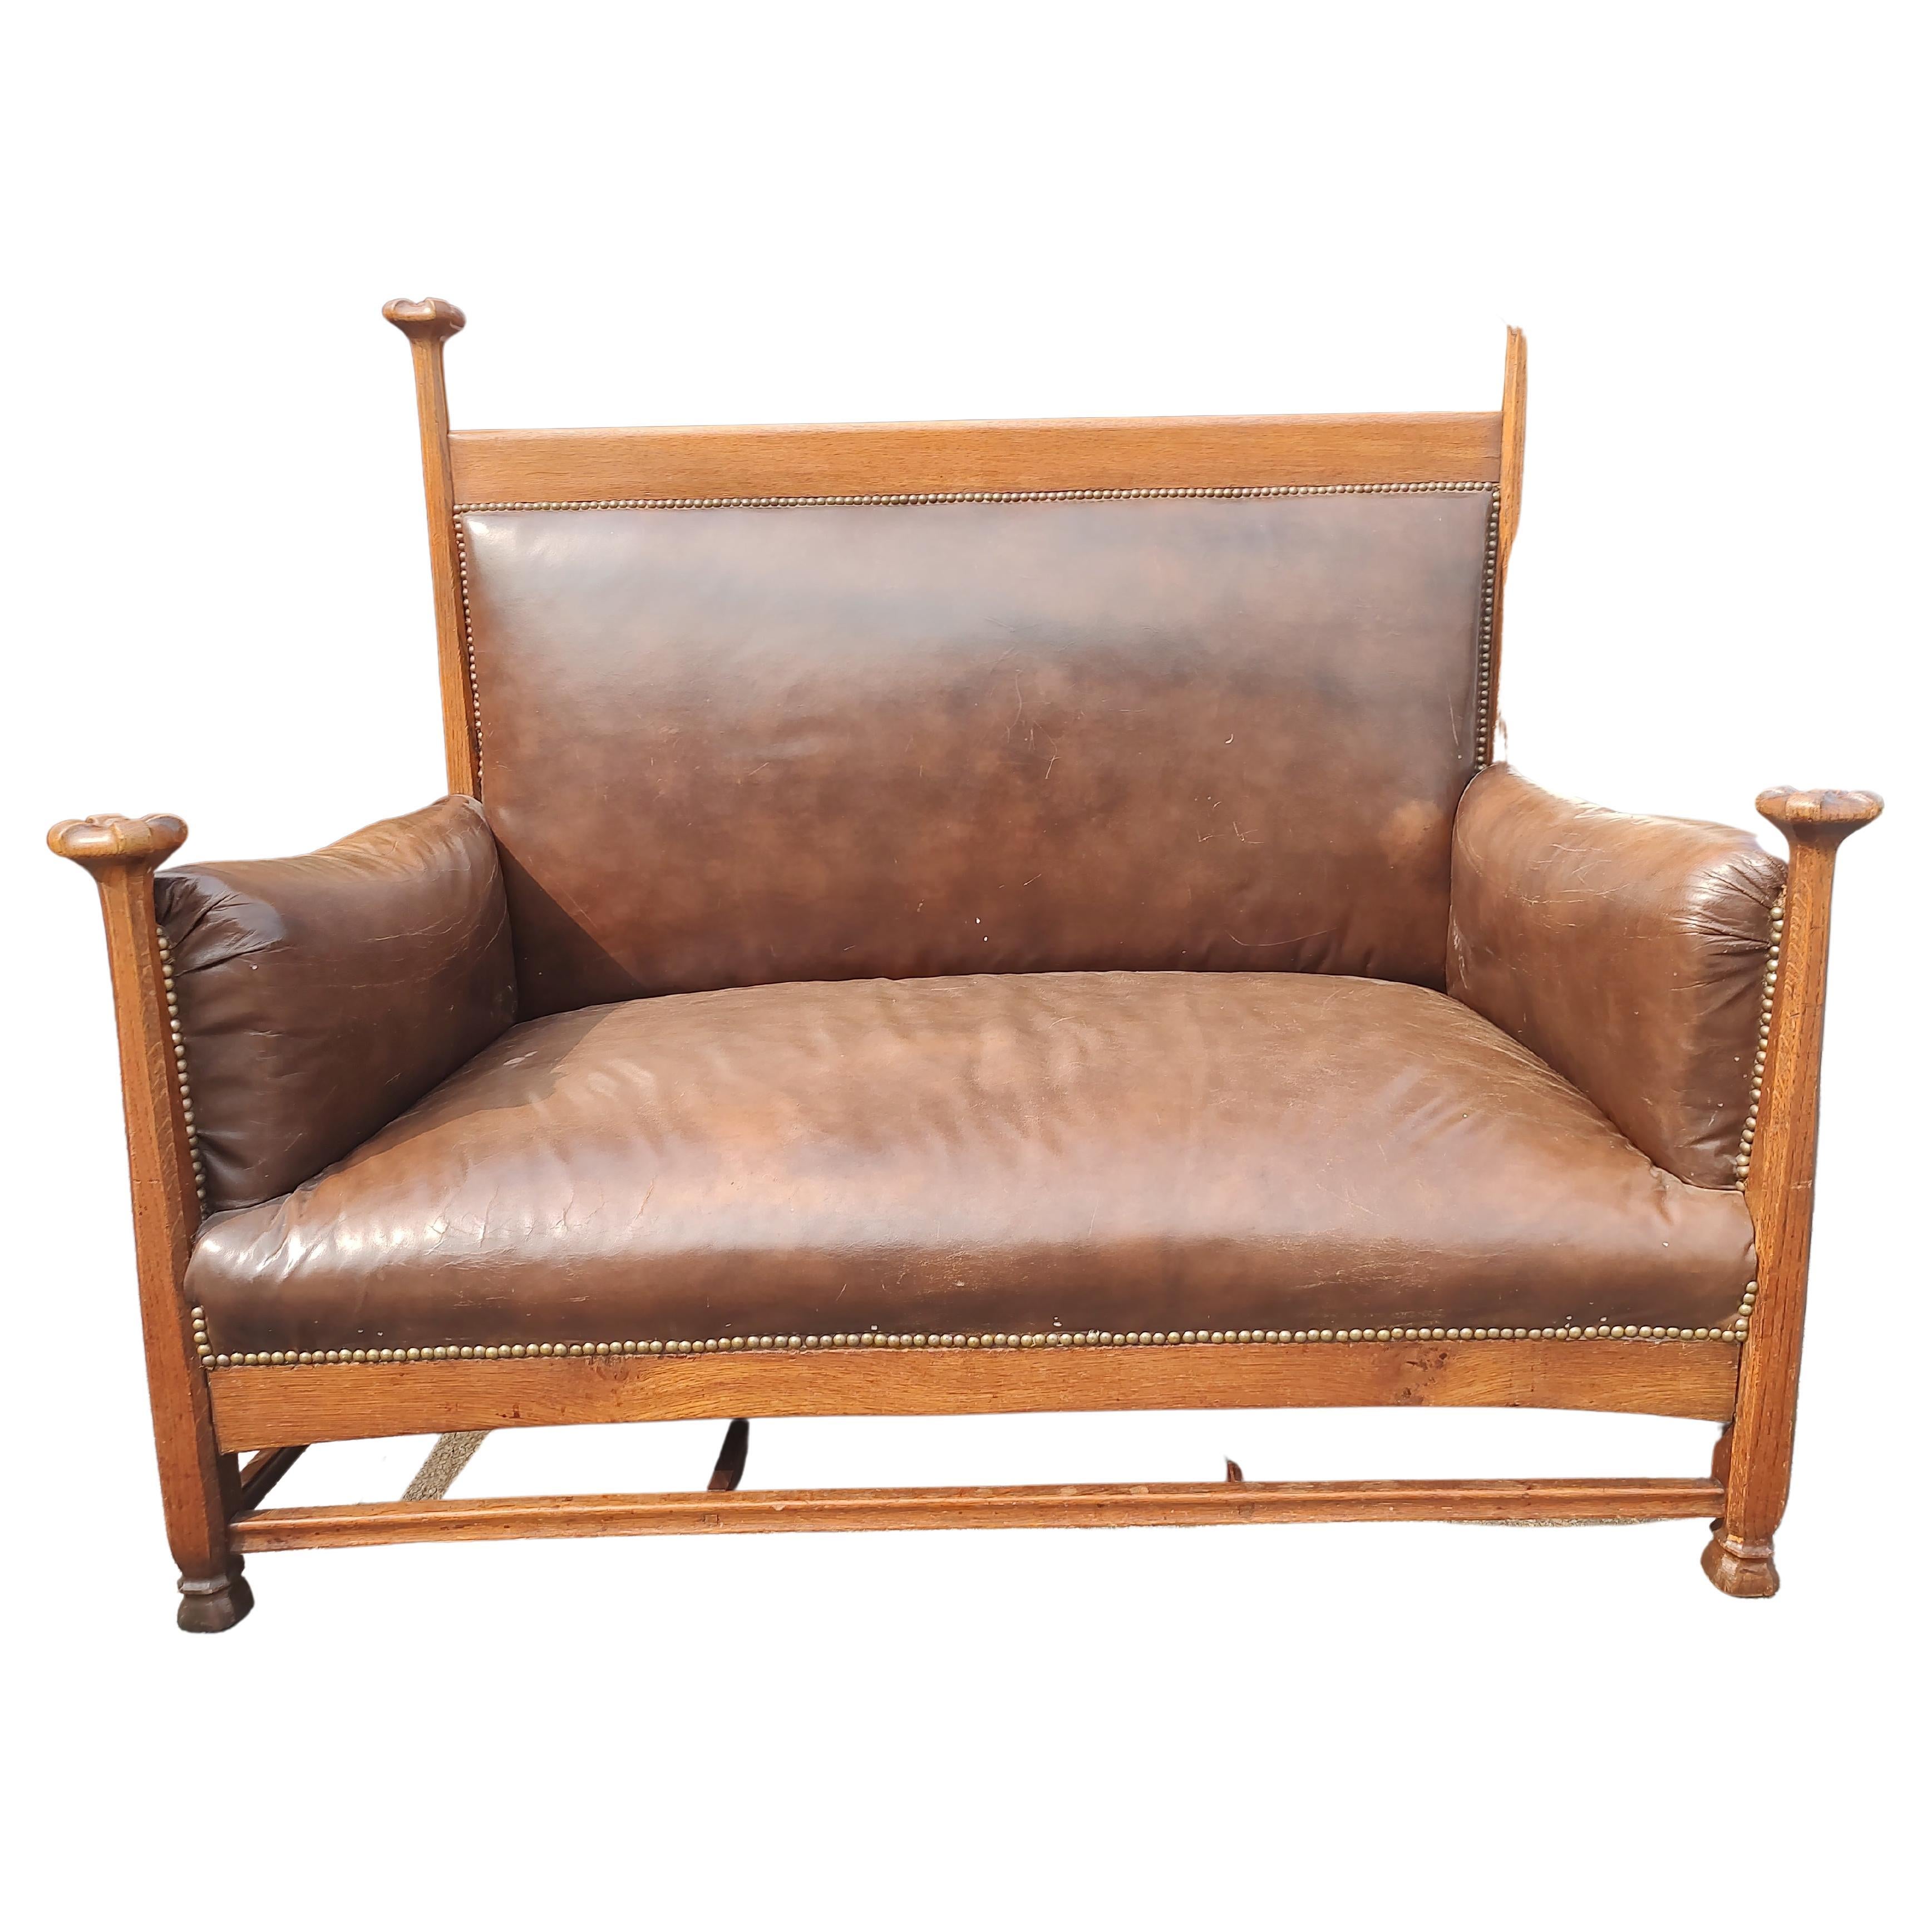 Early 20th Century Scottish Arts & Crafts Leather and Oak Loveseat attributed to Wylie & Lochhead For Sale